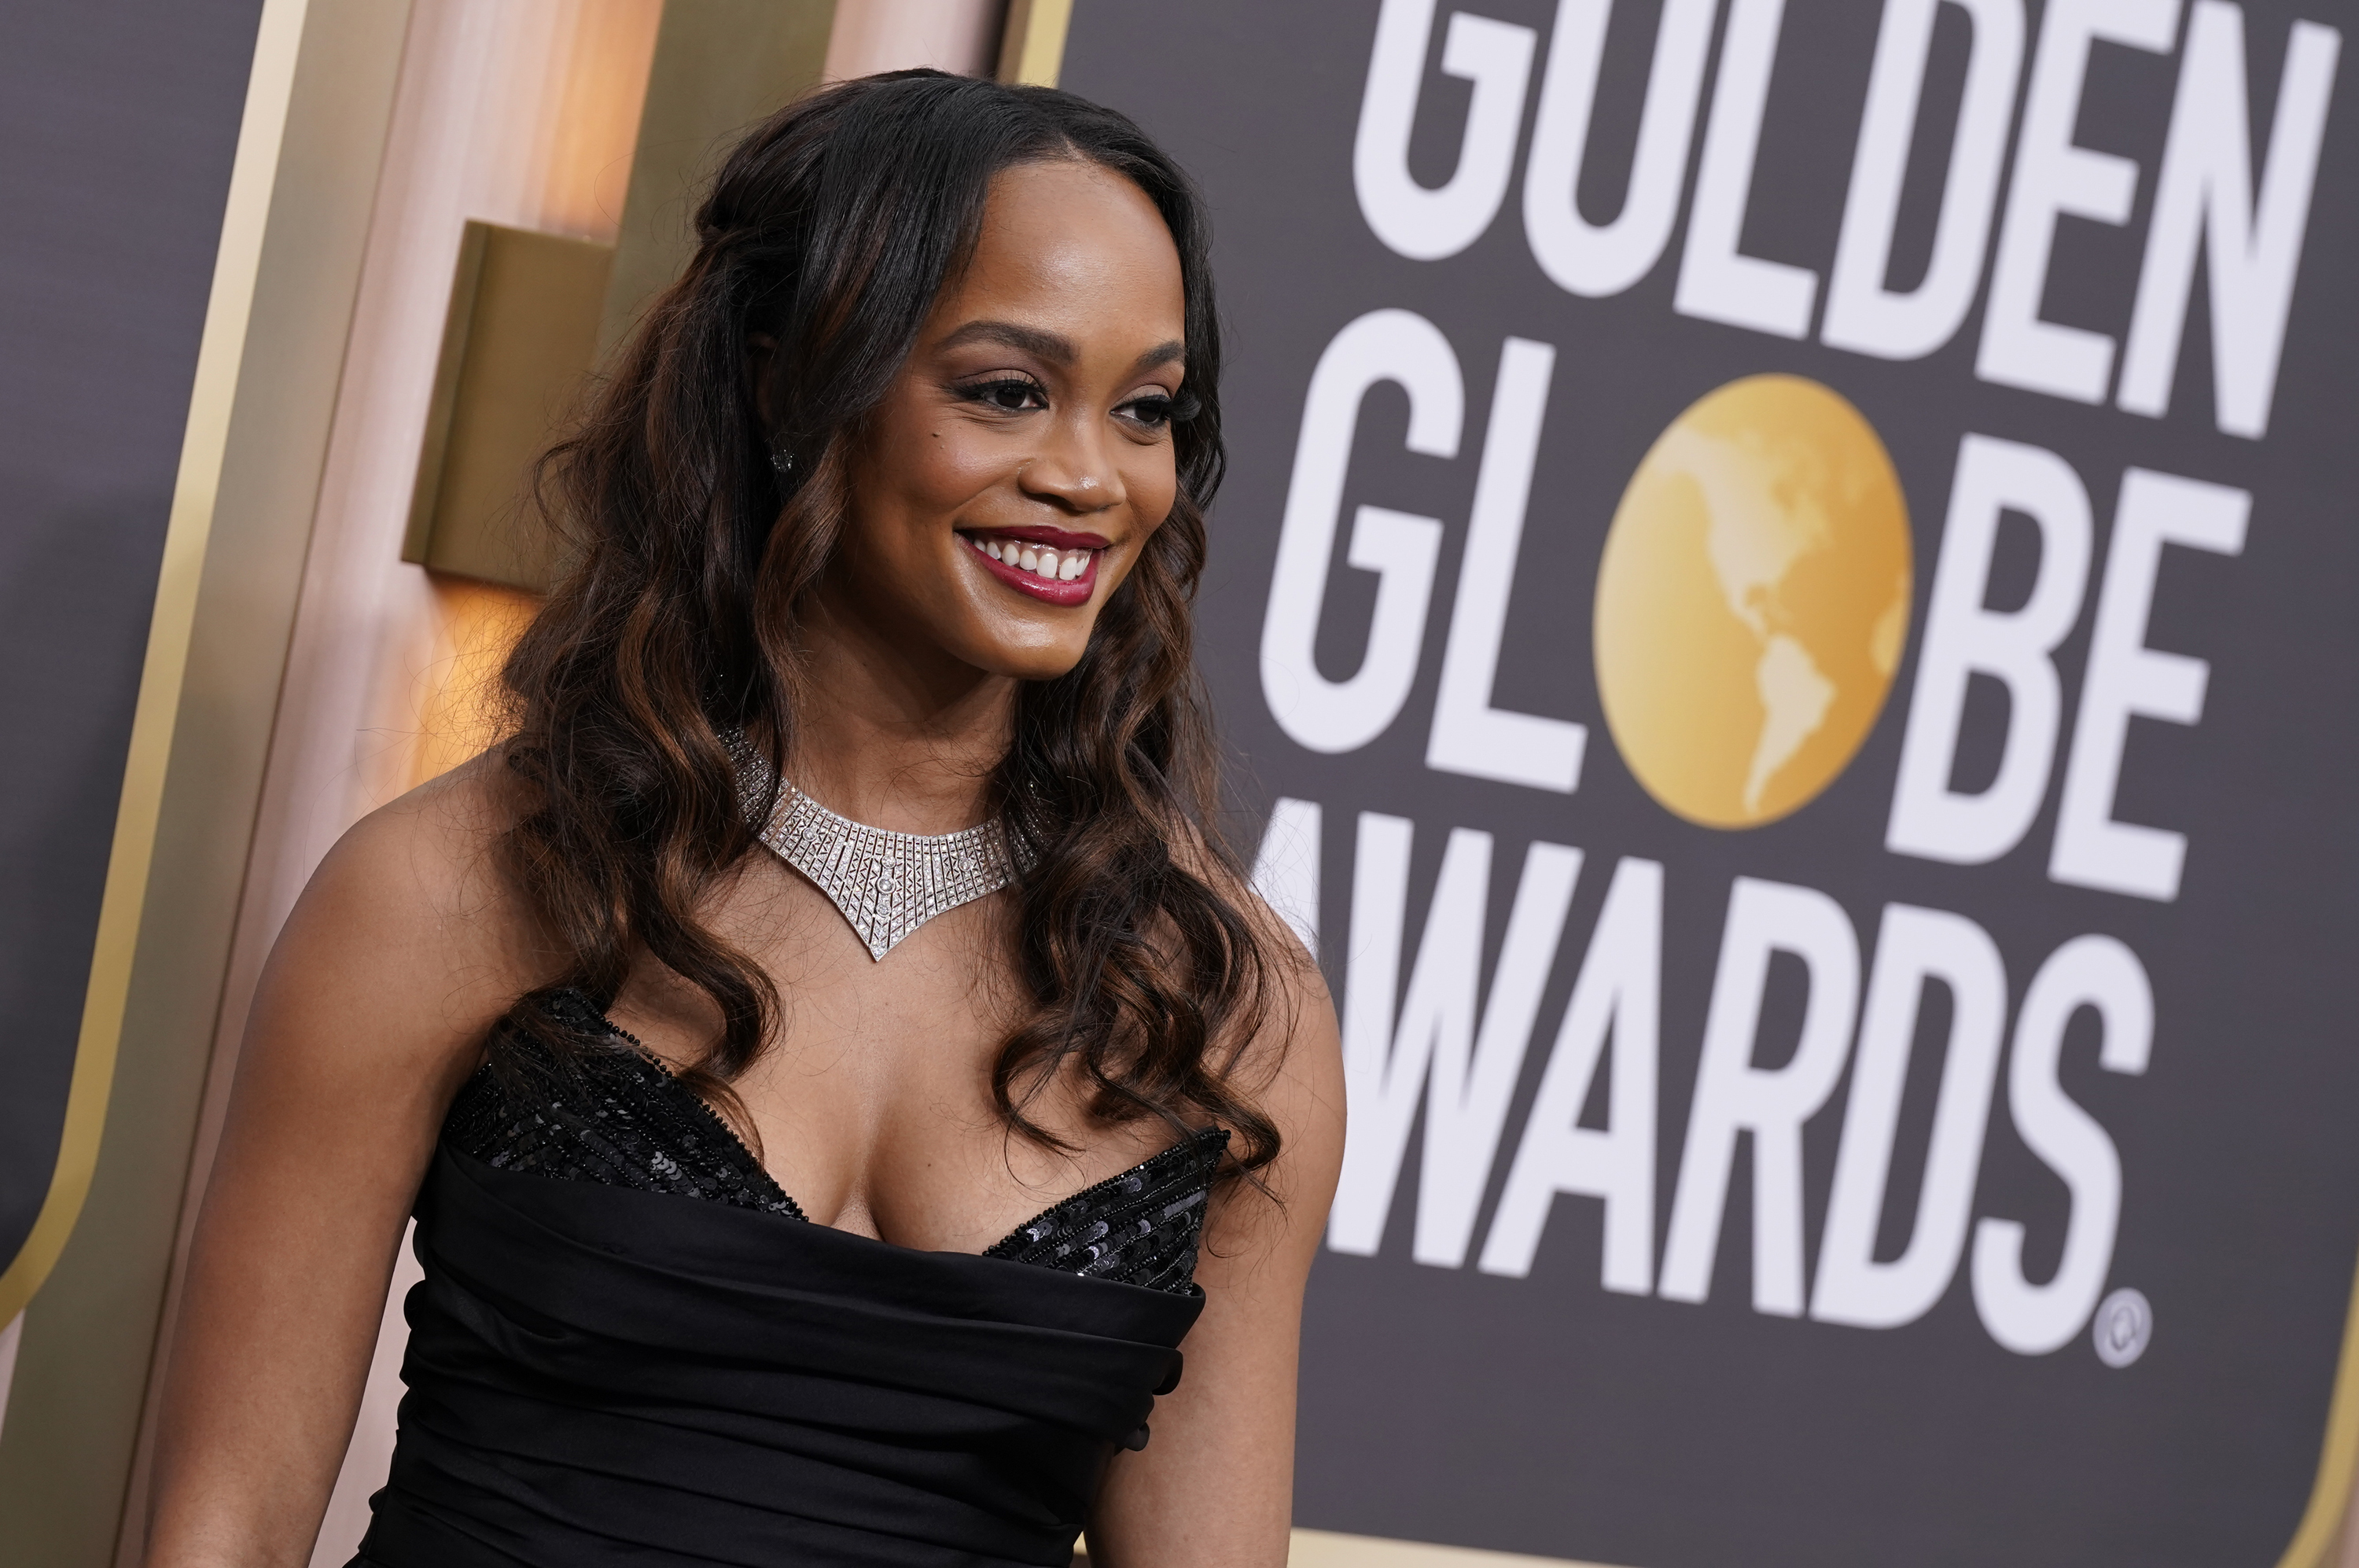 Rachel Lindsay arrives at the 80th annual Golden Globe Awards at the Beverly Hilton Hotel on Tuesday, Jan. 10, 2023, in Beverly Hills, Calif. (Photo by Jordan Strauss/Invision/AP)